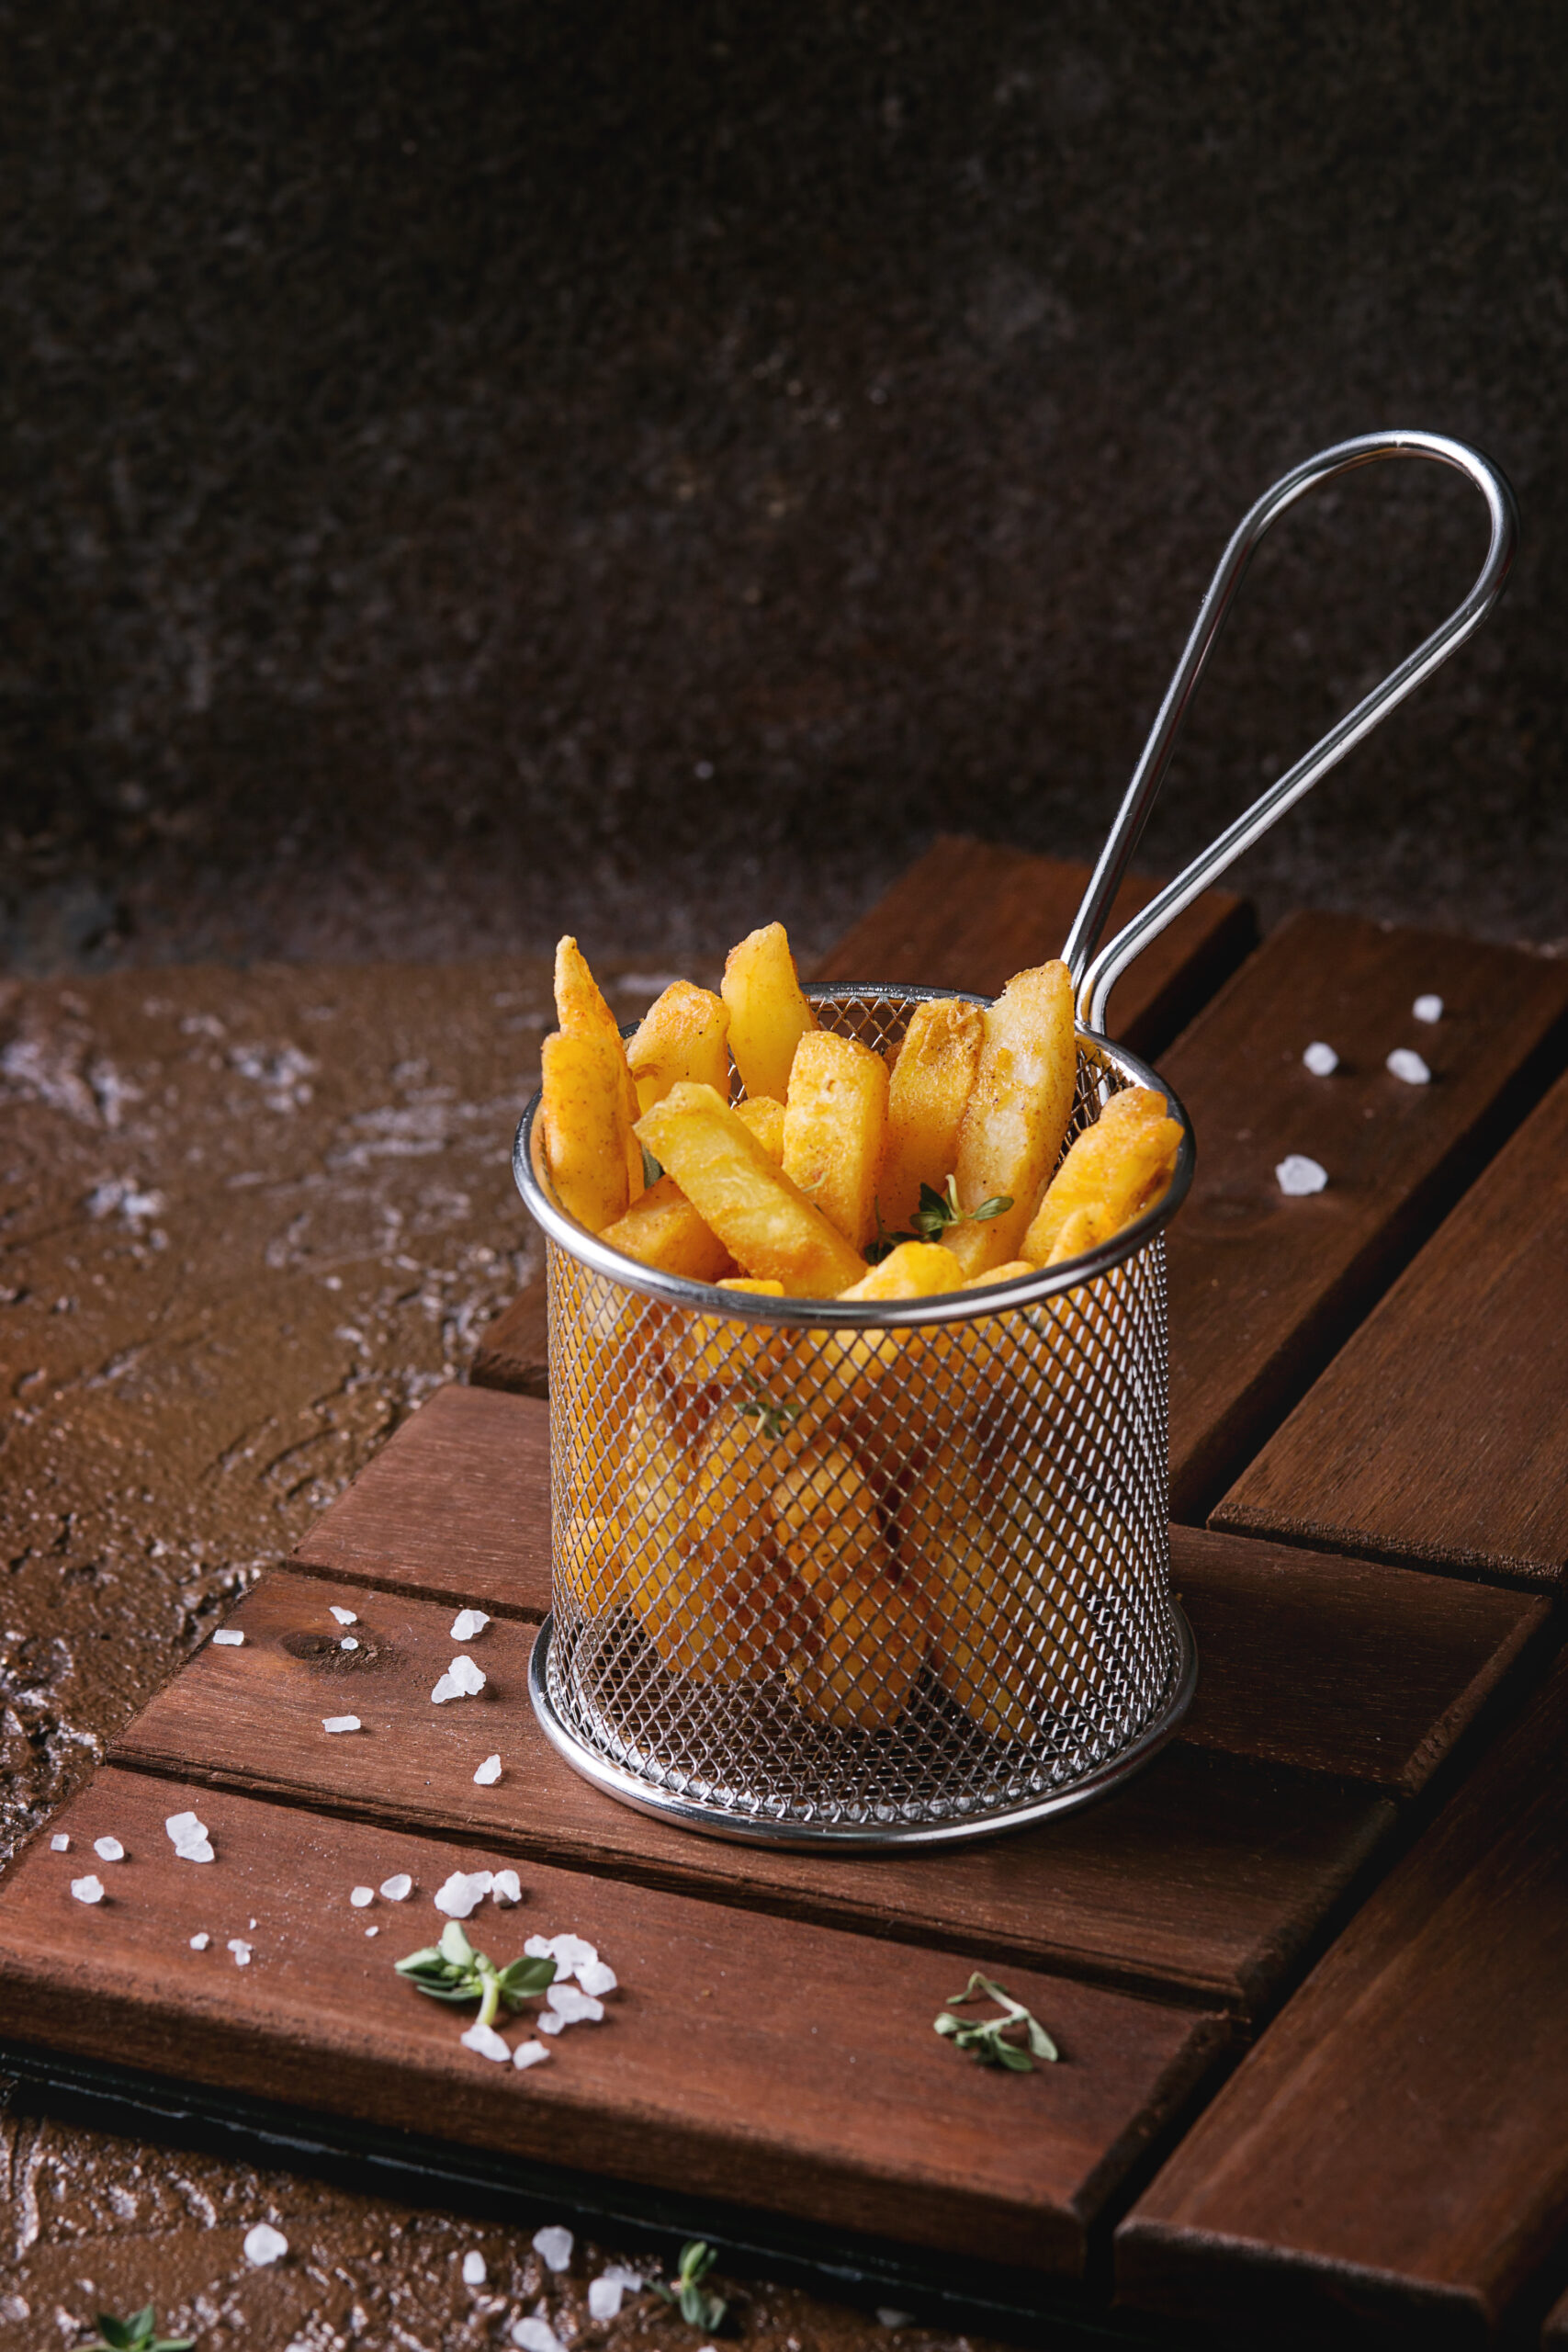 Traditional,French,Fries,Potatoes,Served,In,Frying,Basket,With,Salt,